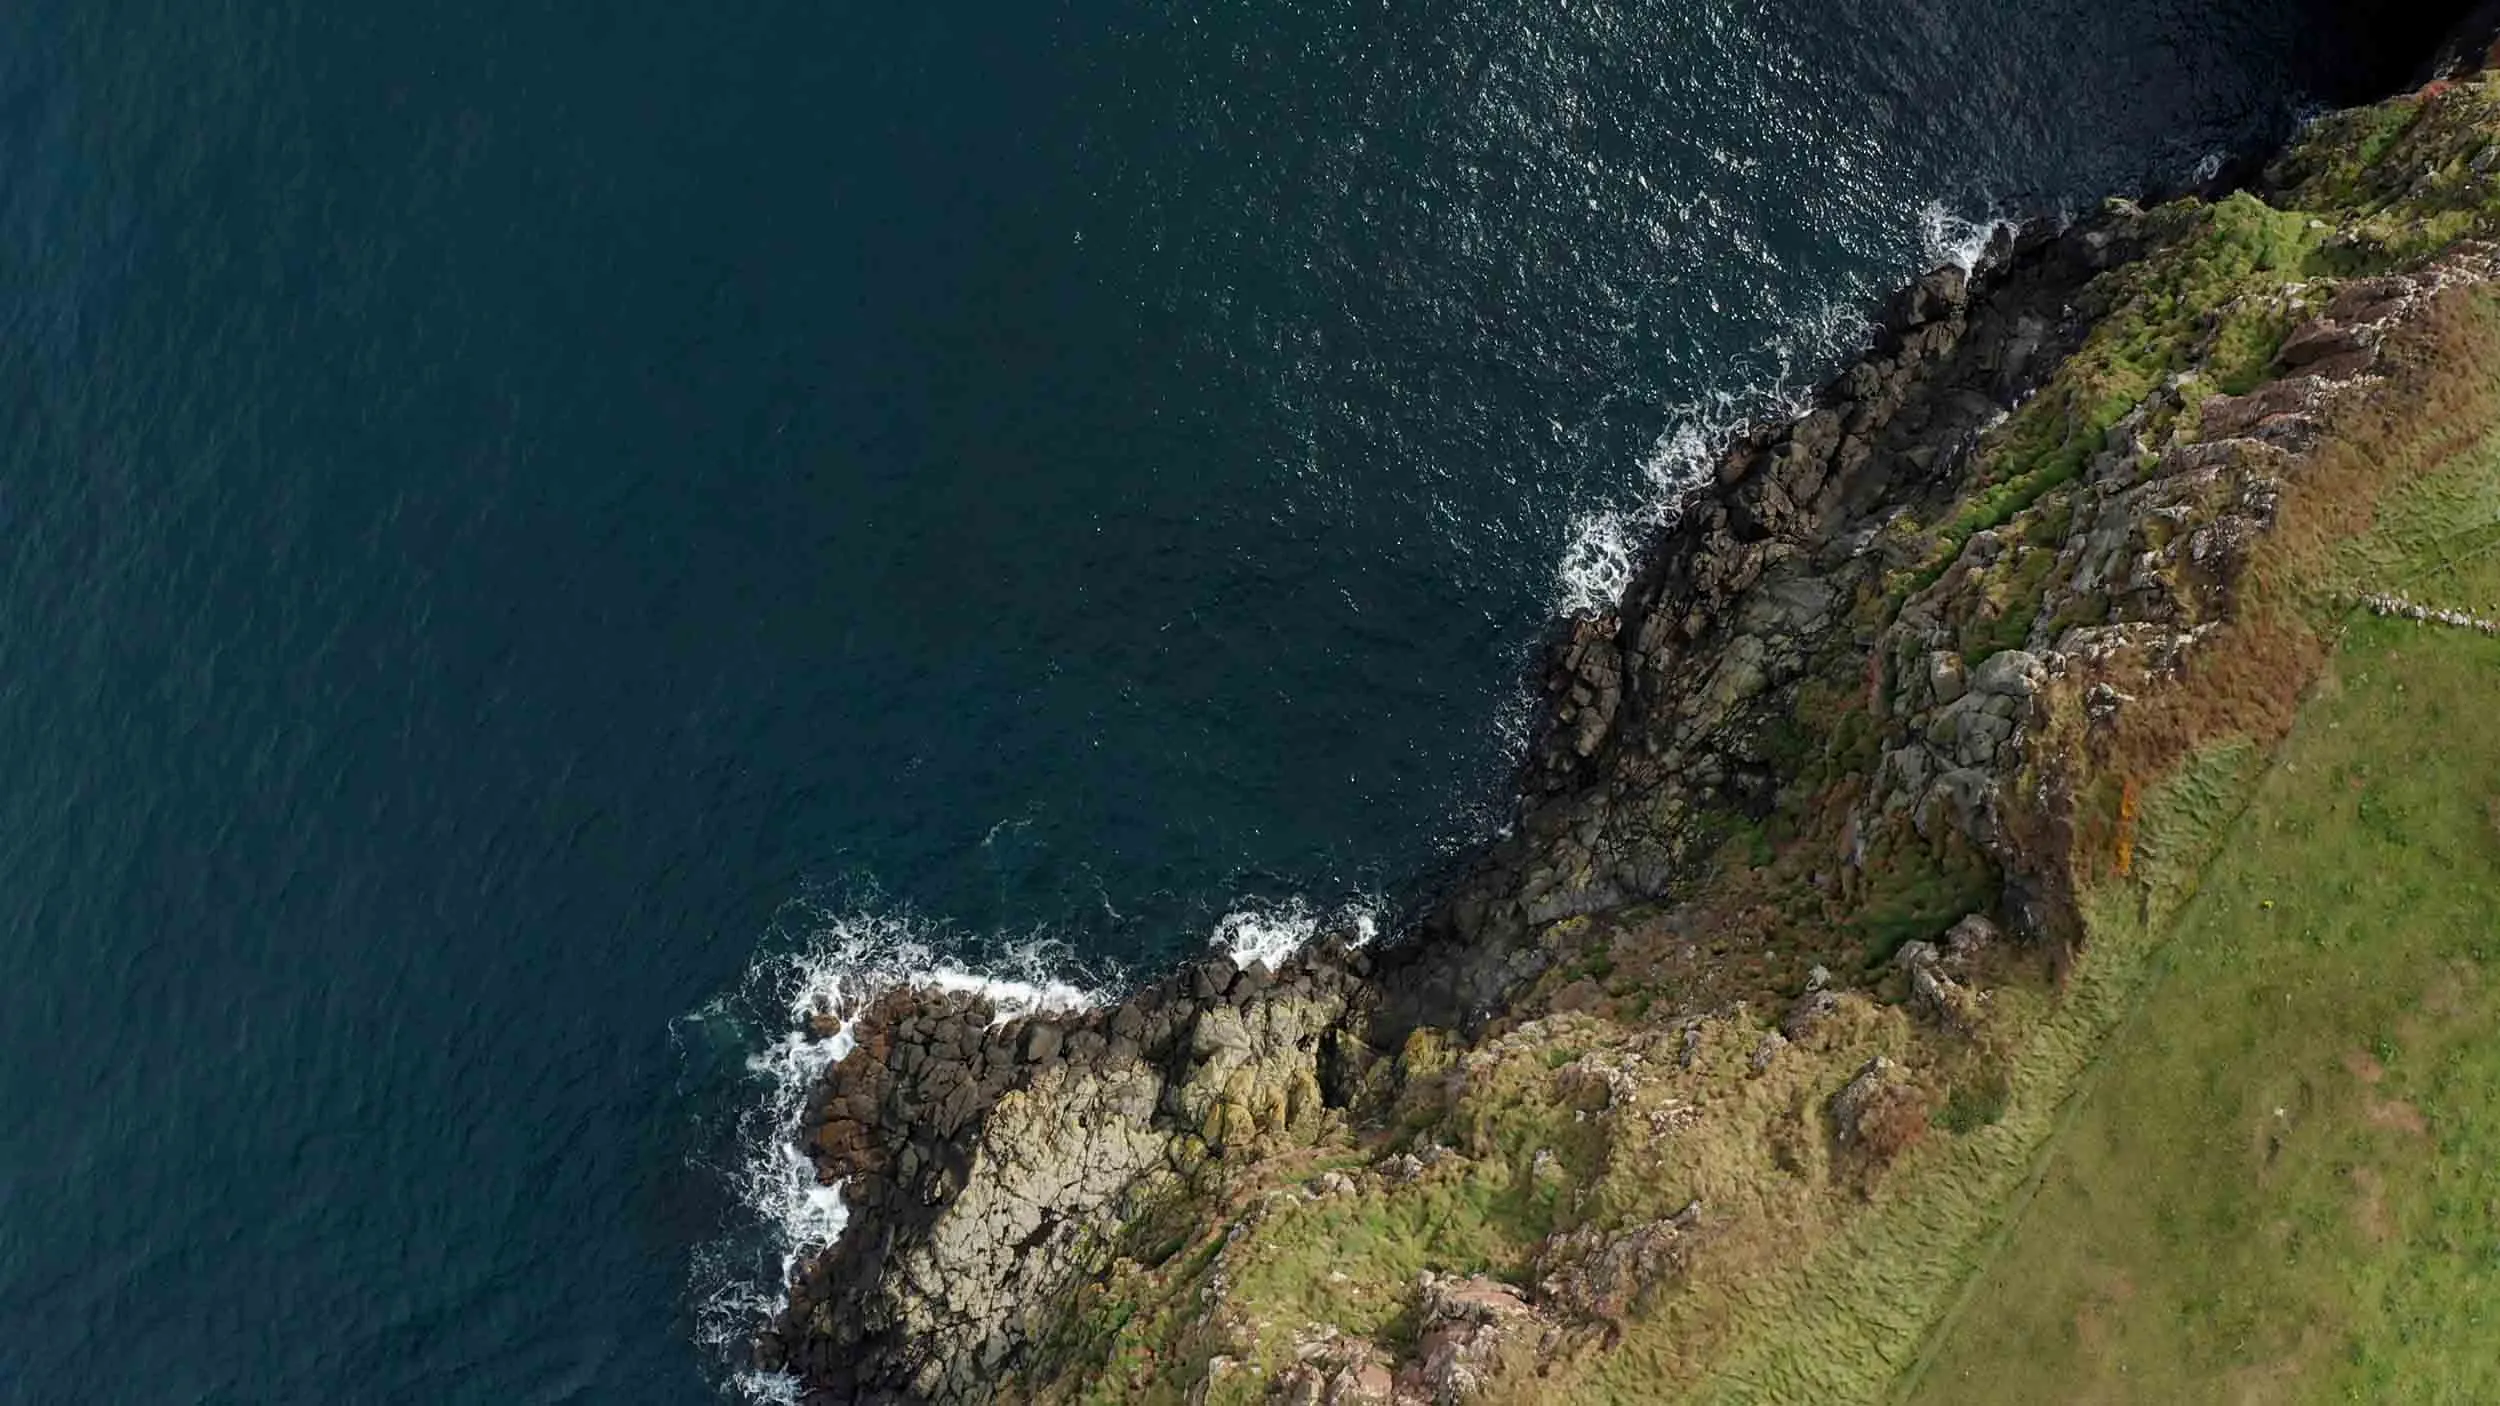 An aerial view of dark blue waves crashing against the grassy cliff at Rathlin.